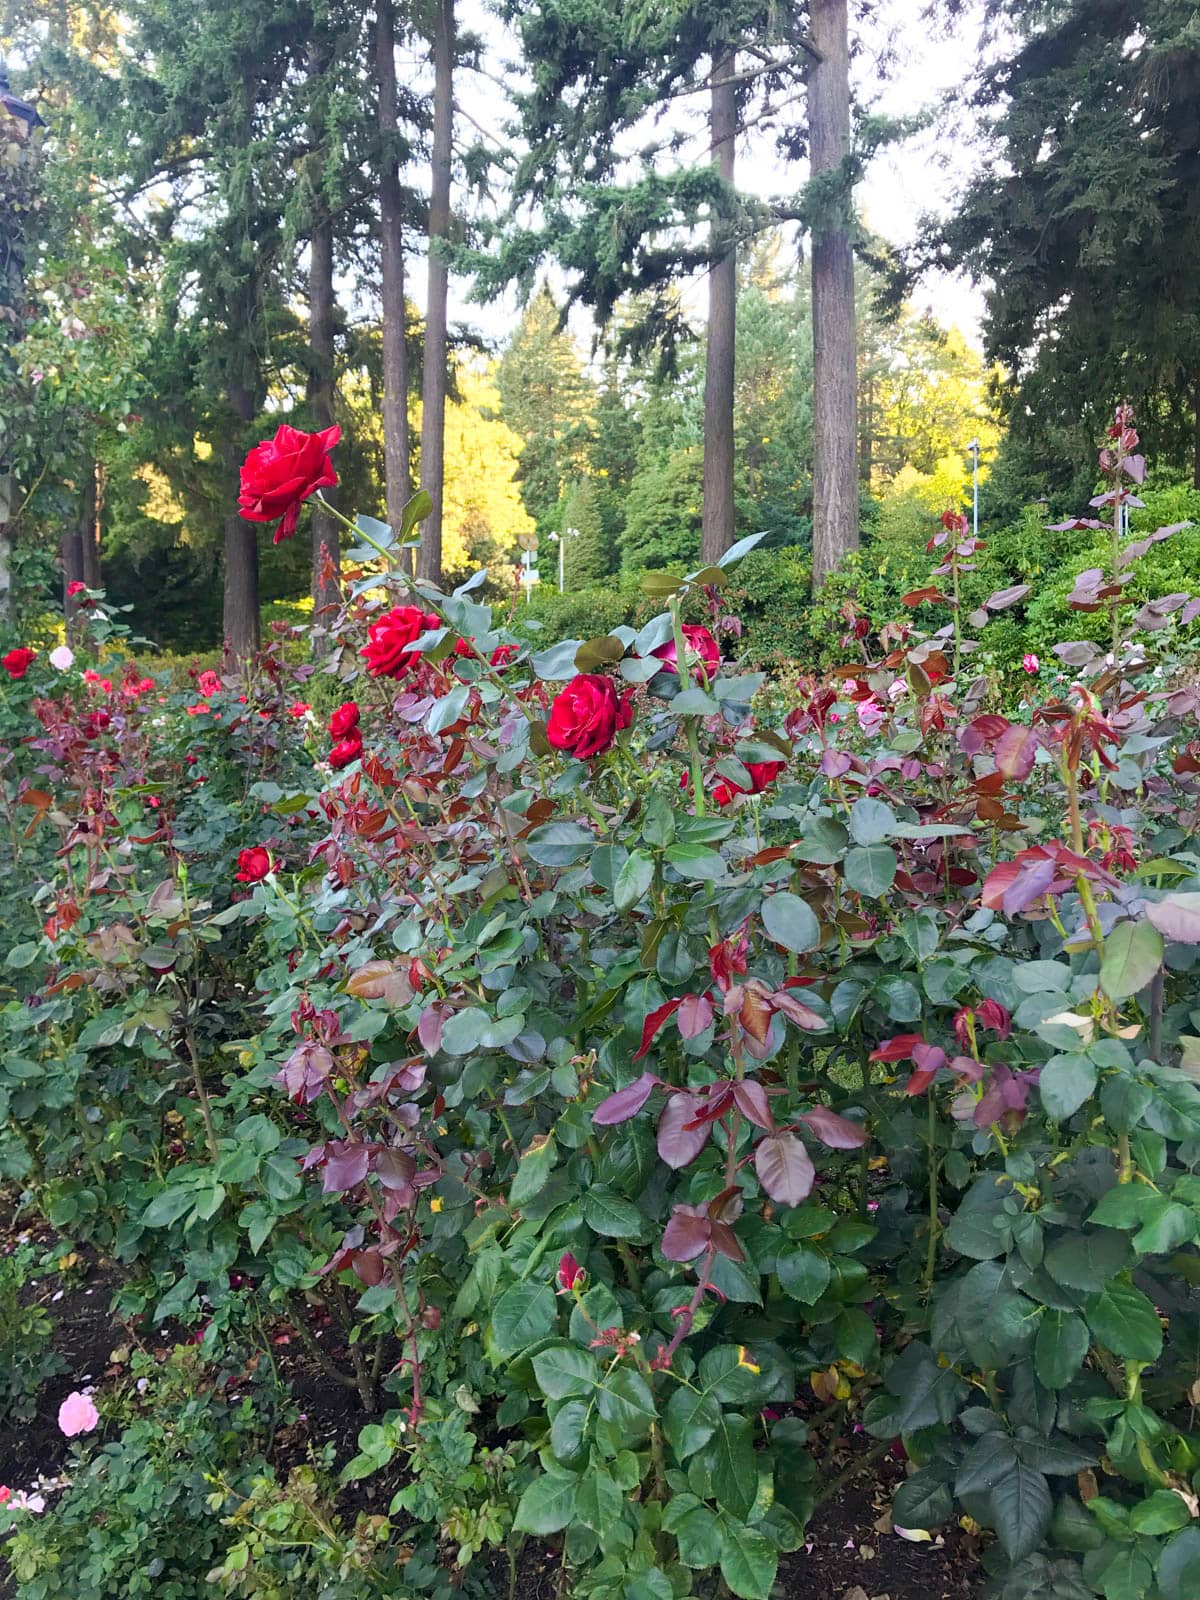 A bush with some dark red but mostly green leaves, and a few bright red roses growing.